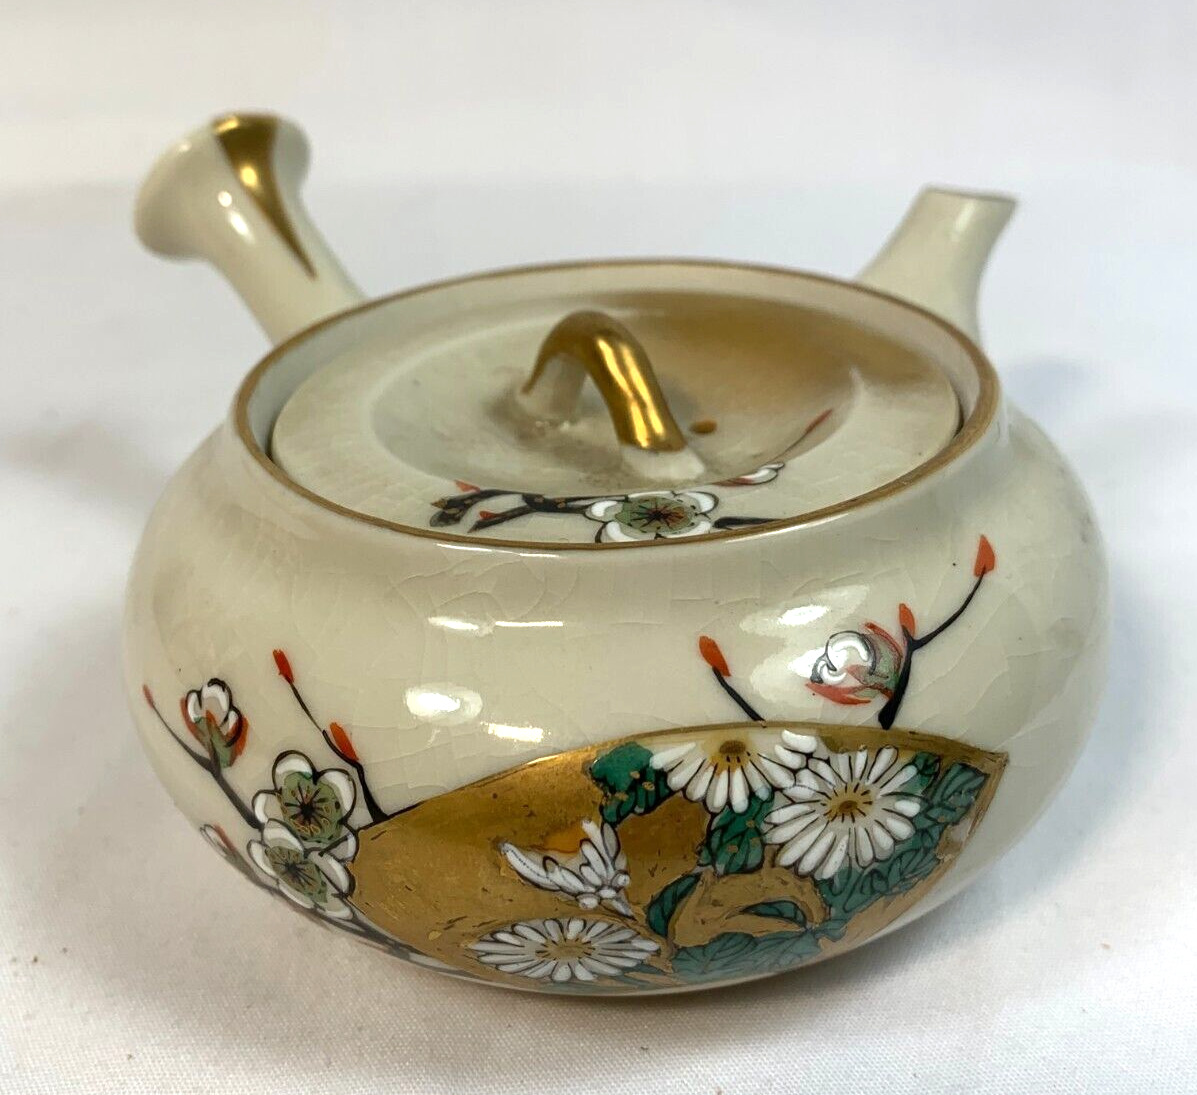 Japanese Teapot Kyusu Plum Blossoms Chrysanthemums and a Fan Vintage Small